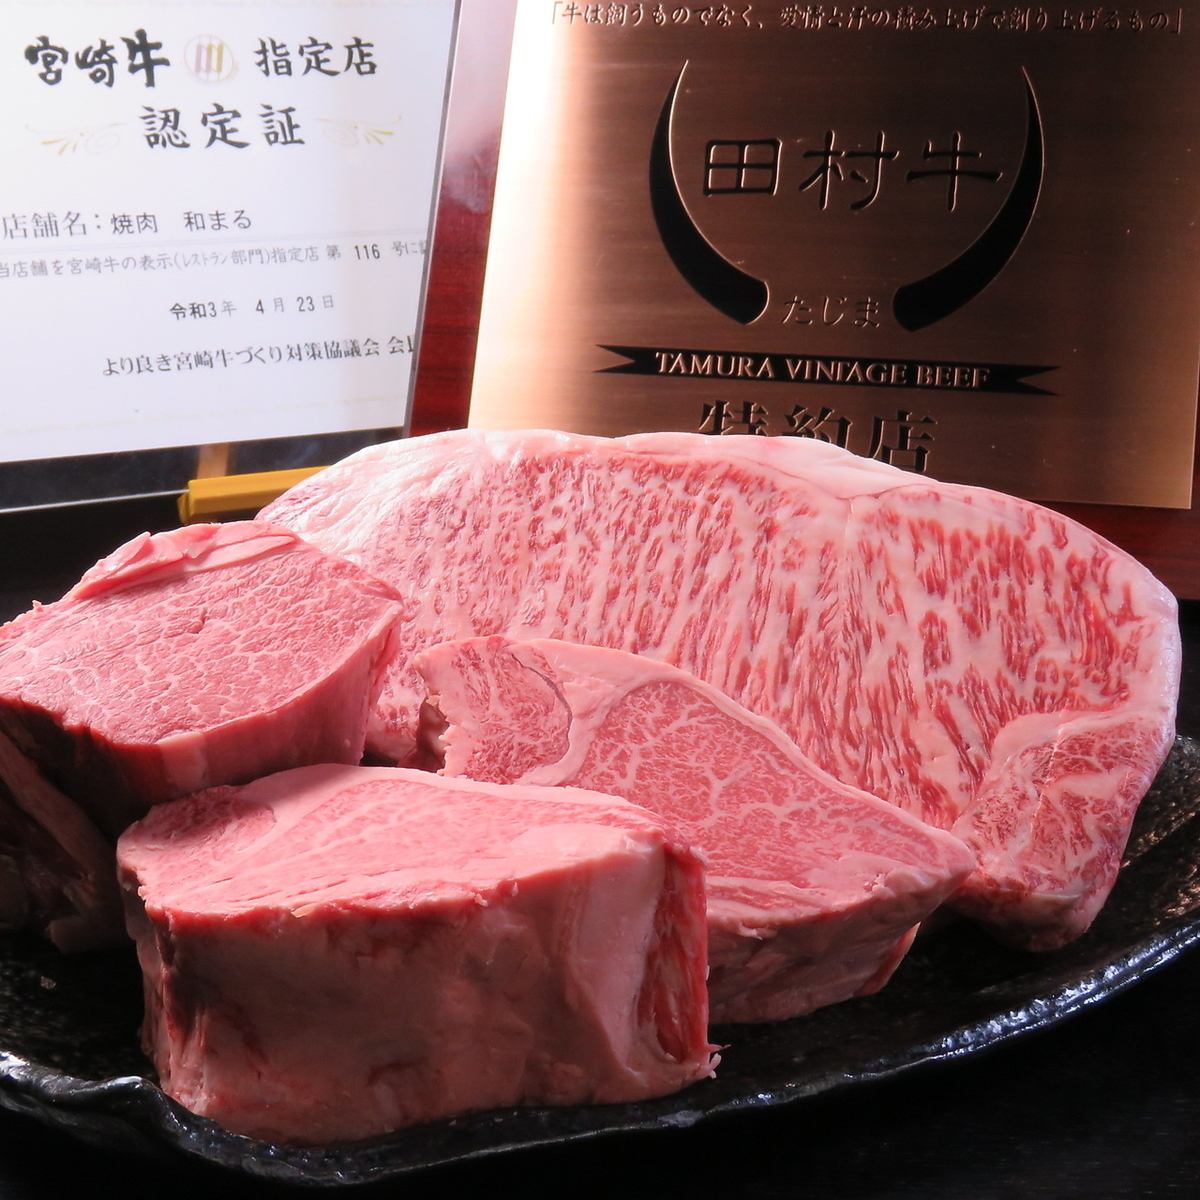 A restaurant where you can enjoy famous Japanese beef in Japan at a reasonable price